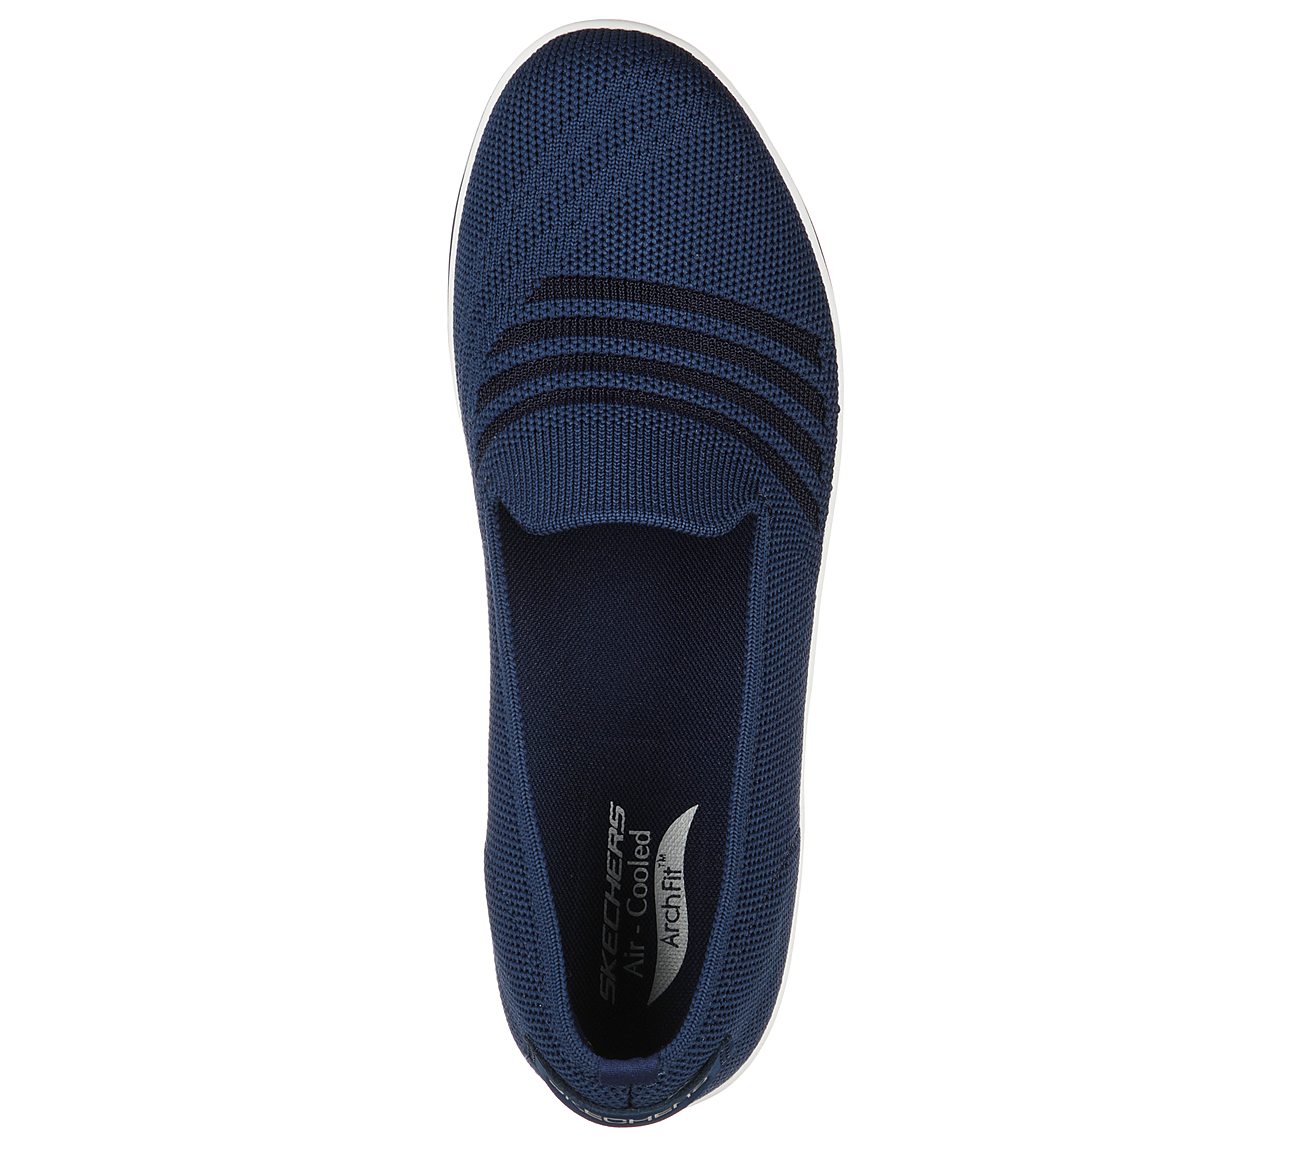 ARCH FIT UPLIFT-CUTTING EDGE, NNNAVY Footwear Top View